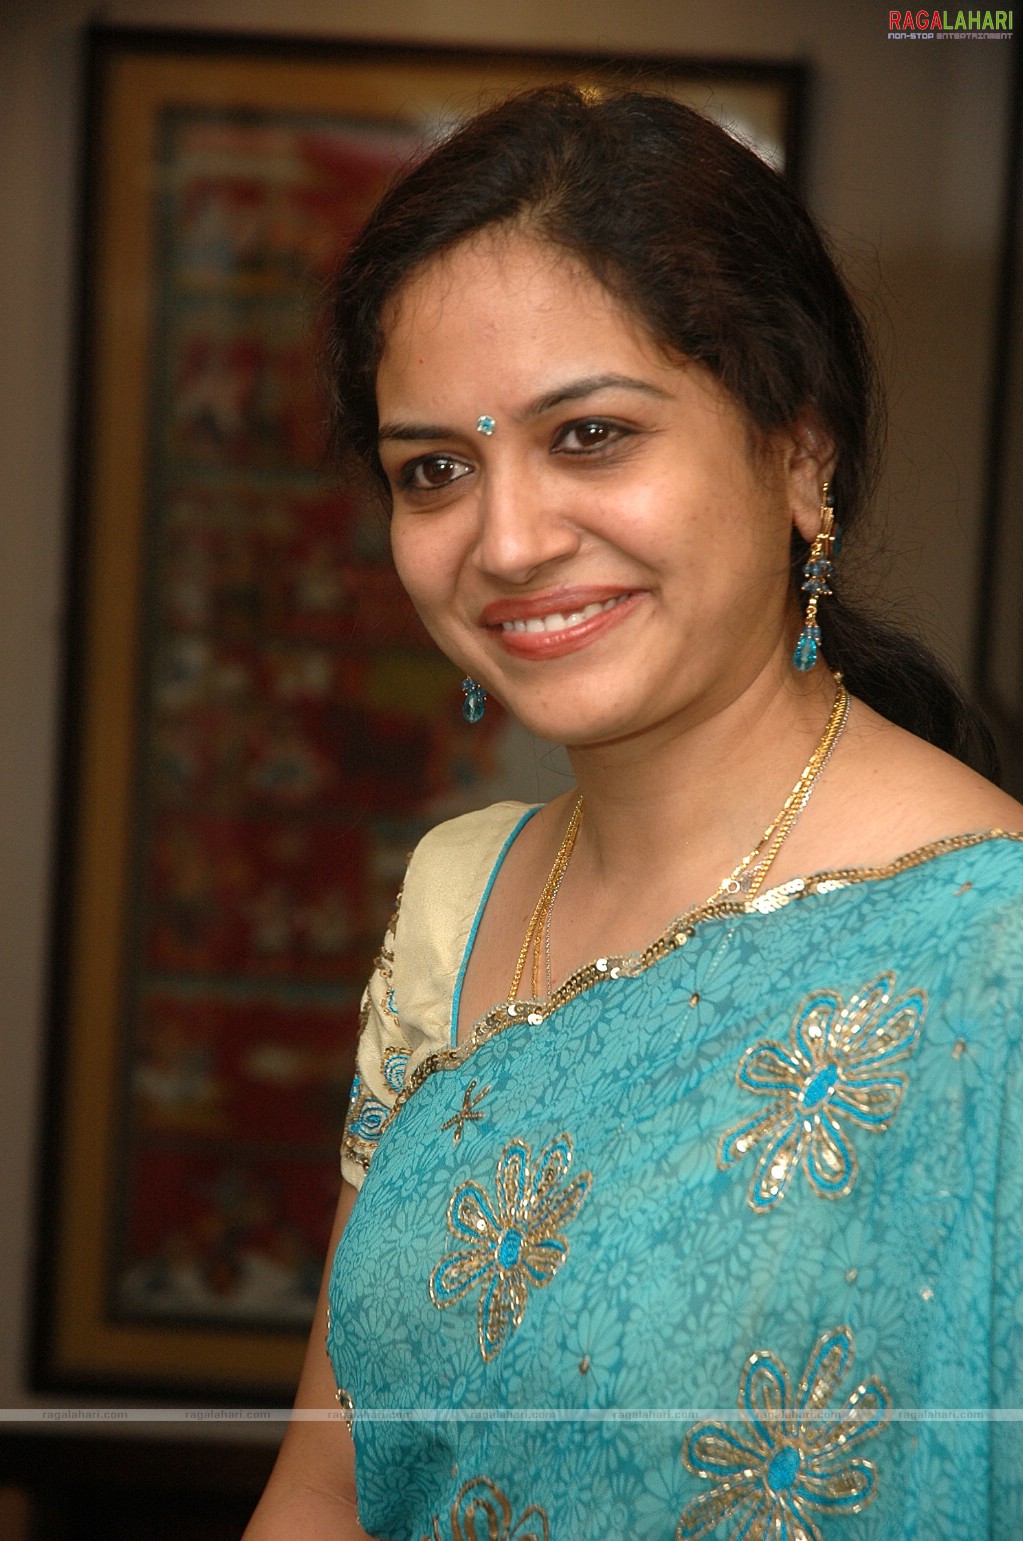 south Jokes&comedies: Singer Sunitha Wants Divorse from Her Husband